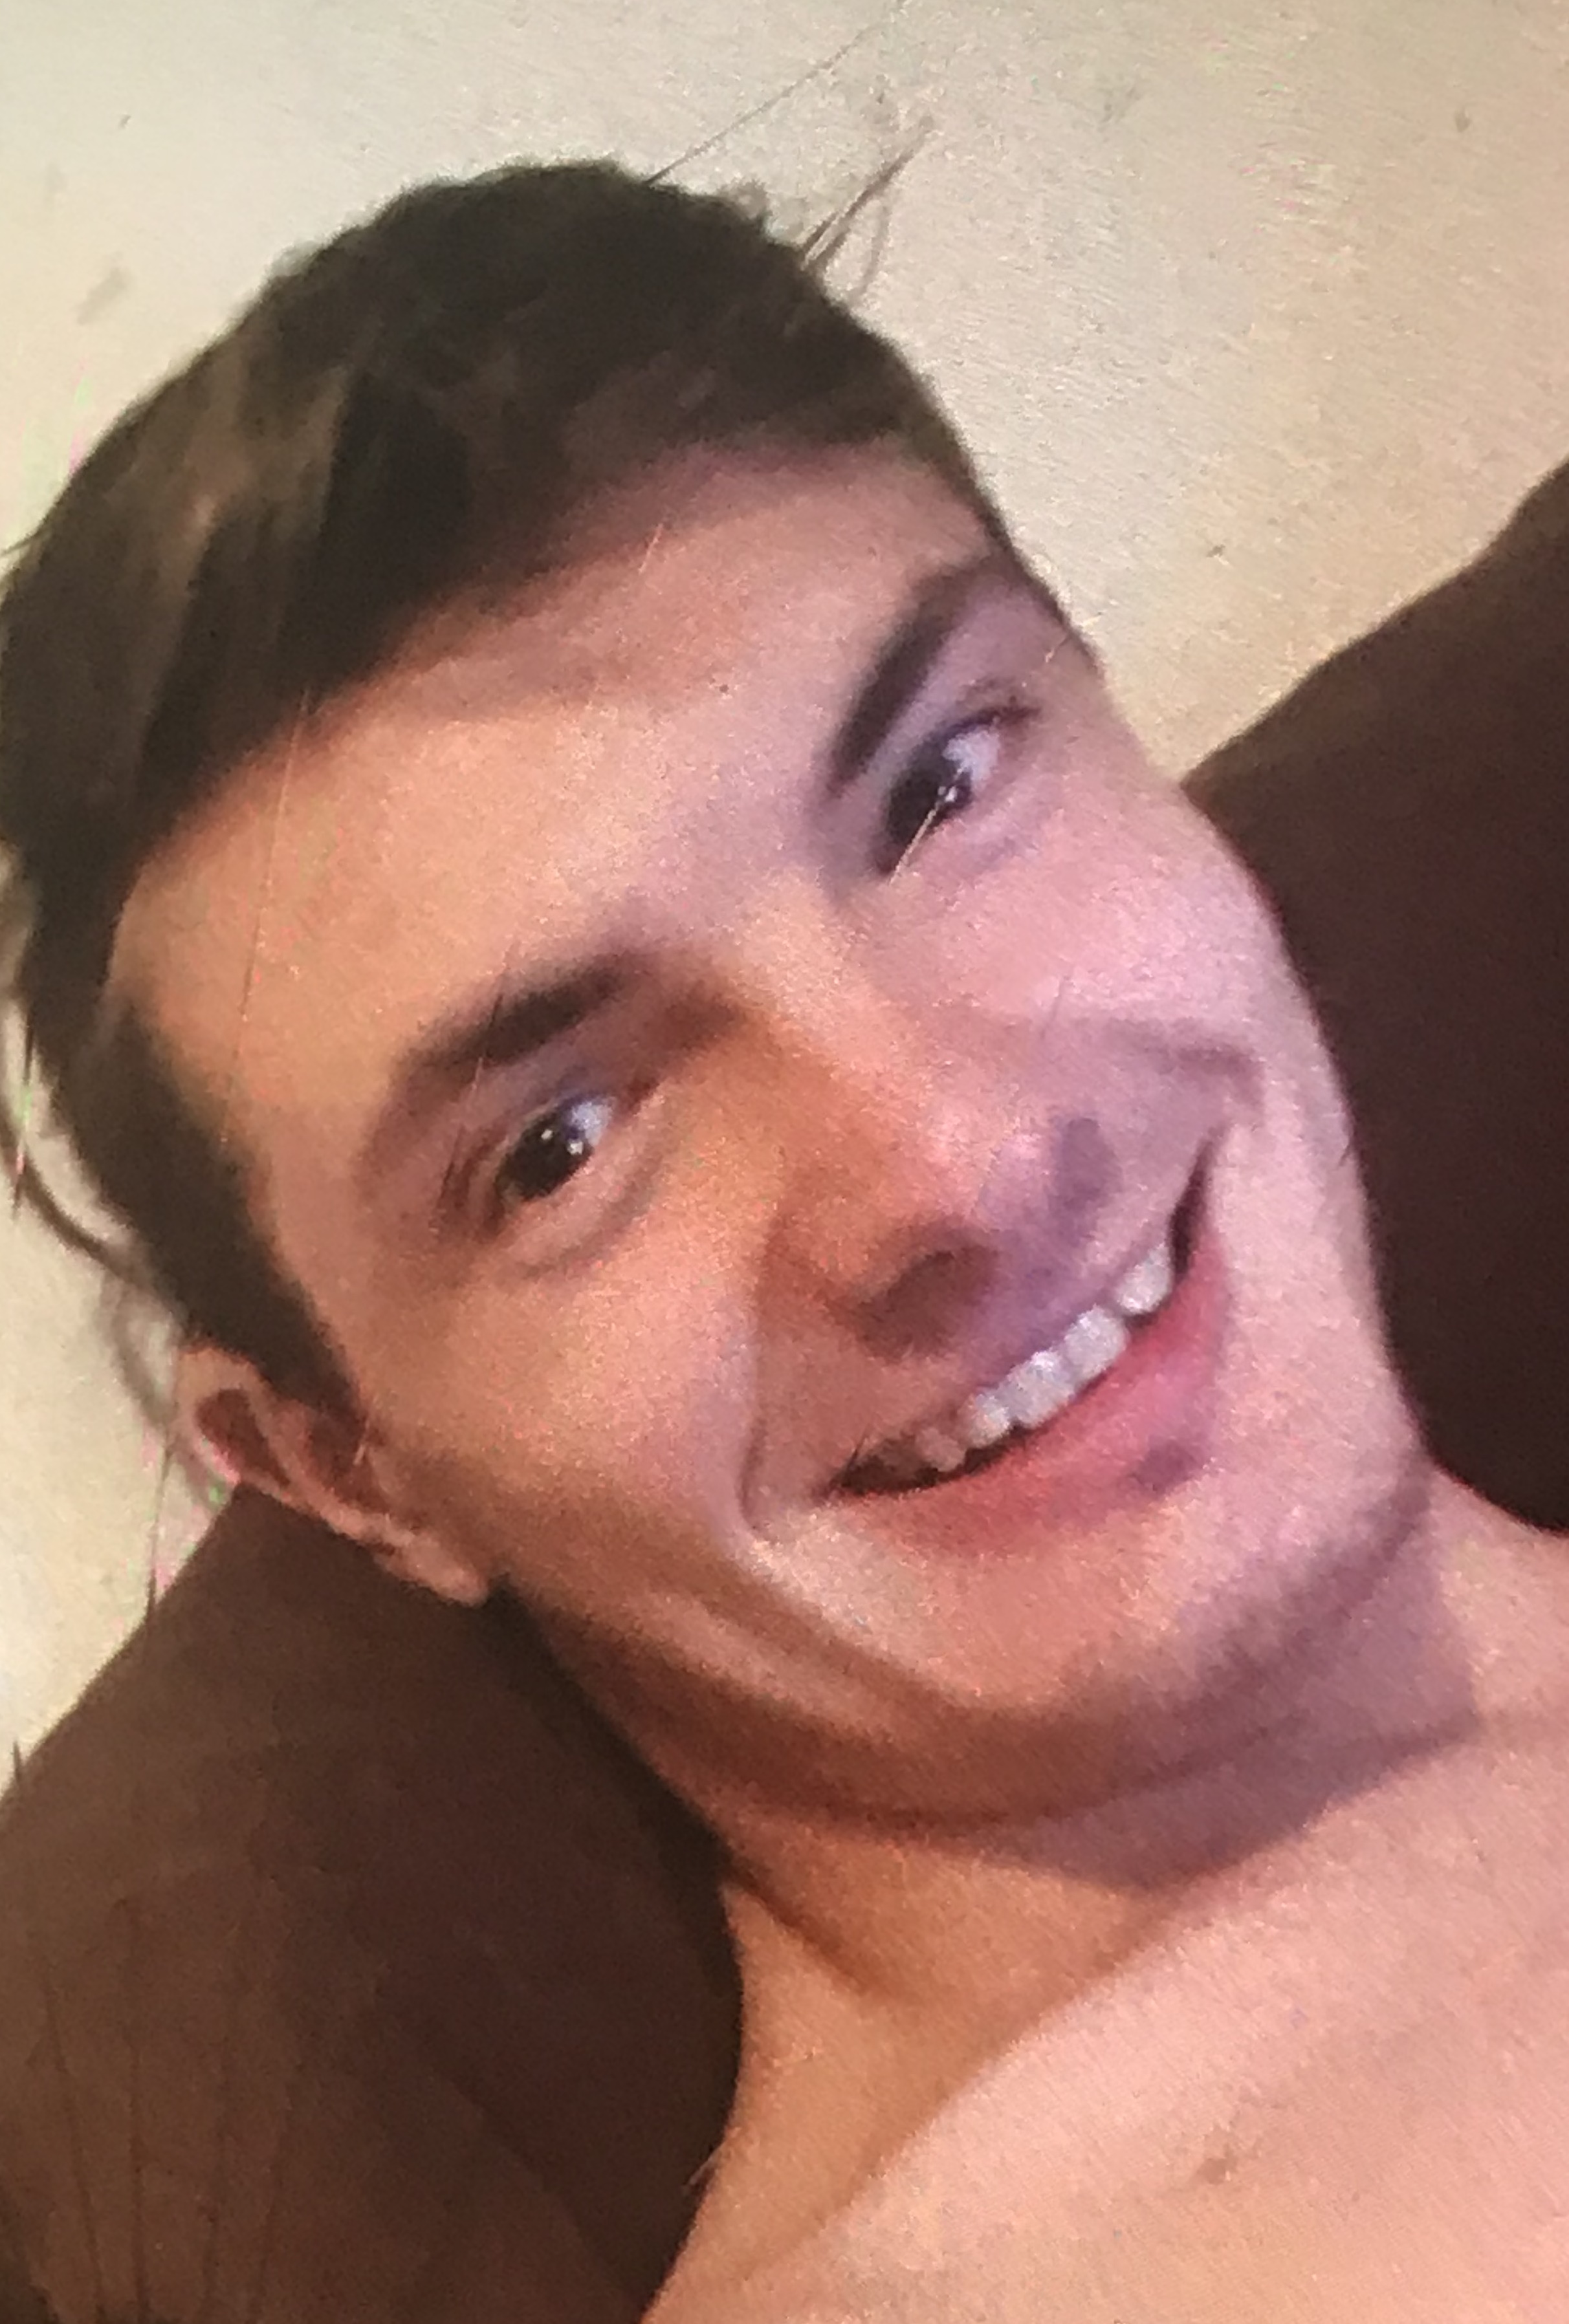 Tomas Baker, who police believe is with missing teen Naomi Rees